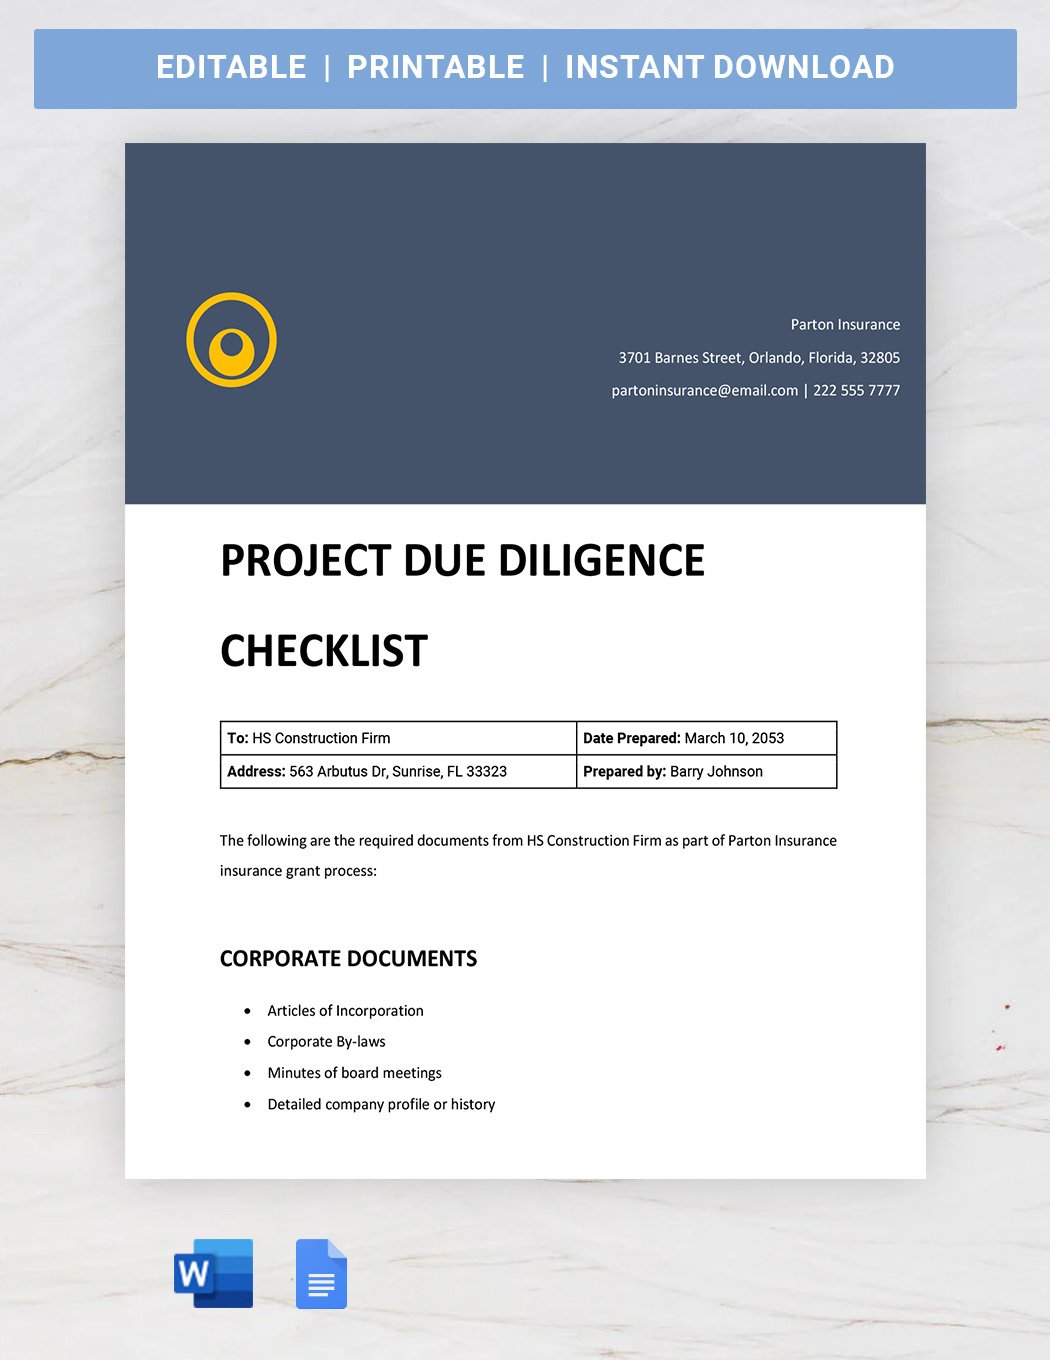 Project Due Diligence  in Word, Google Docs, Apple Pages